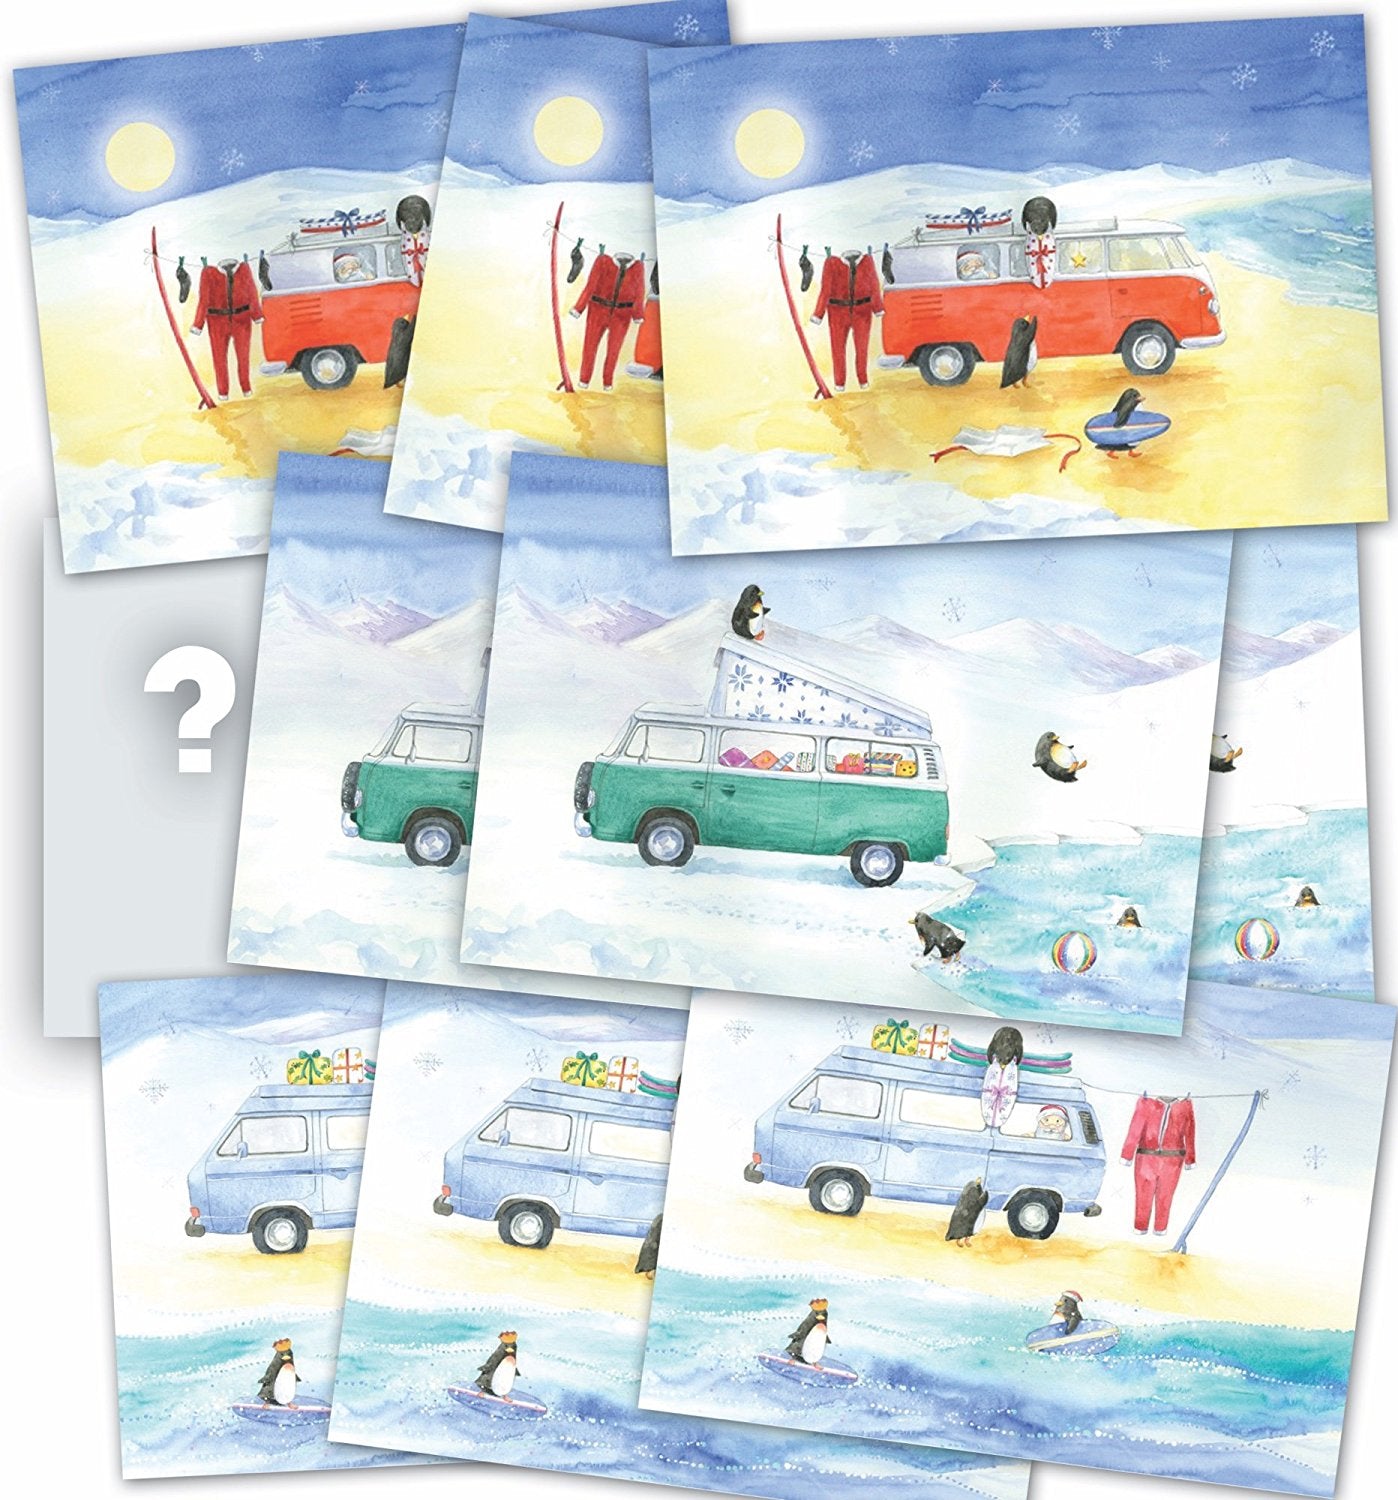 Camper van Christmas cards Ceinwen Campbell and The Arty Penguin 